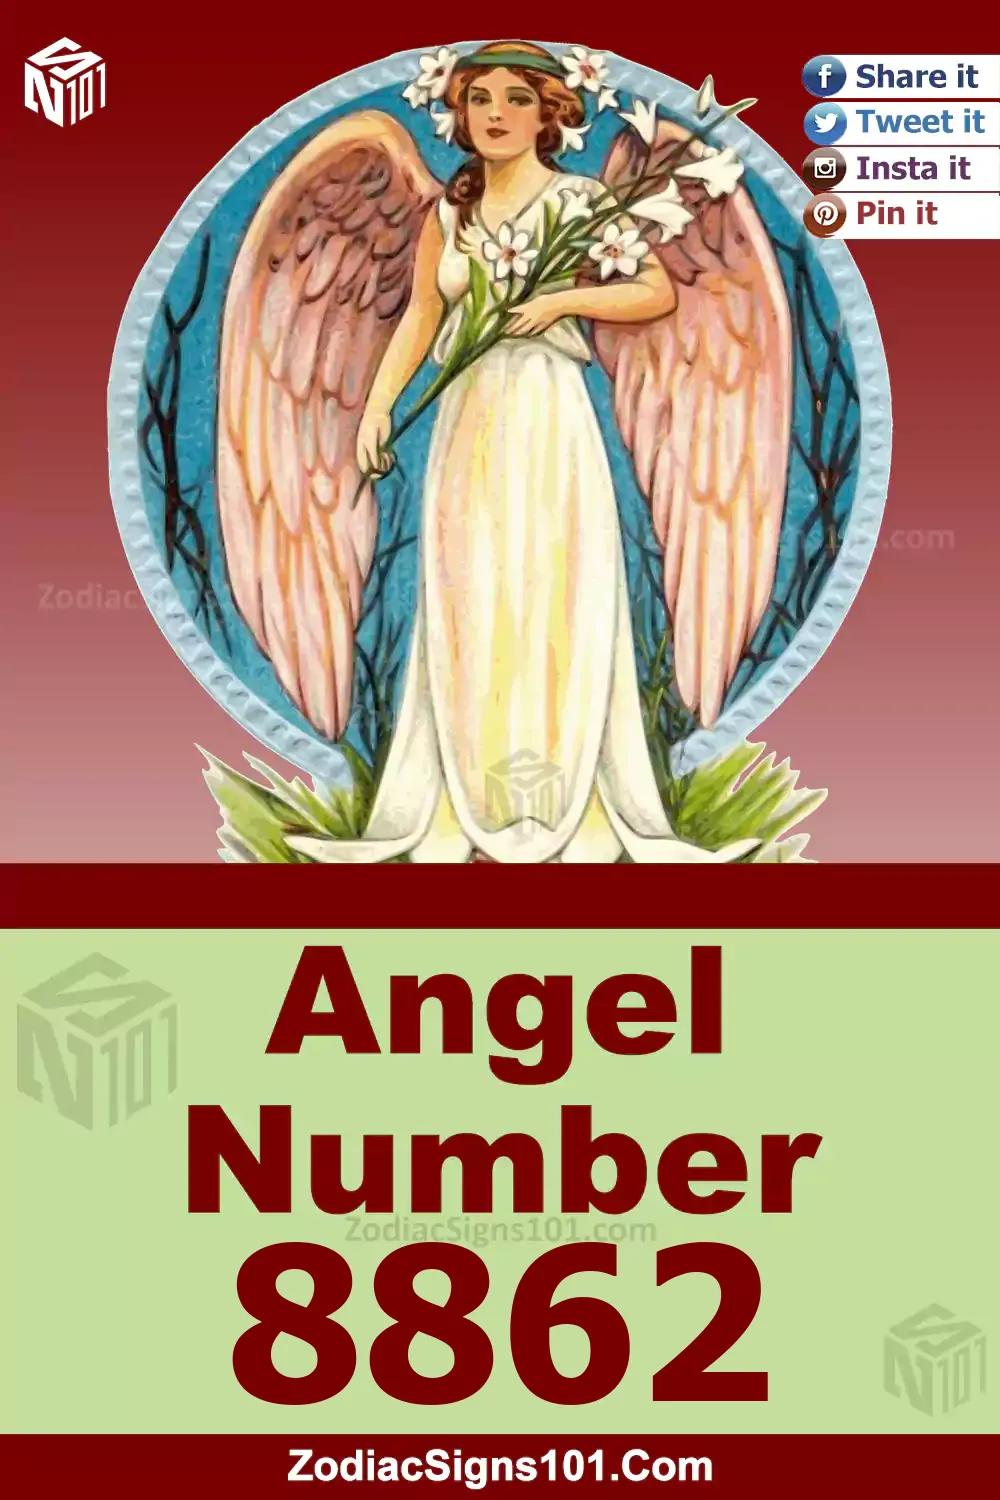 8862 Angel Number Meaning